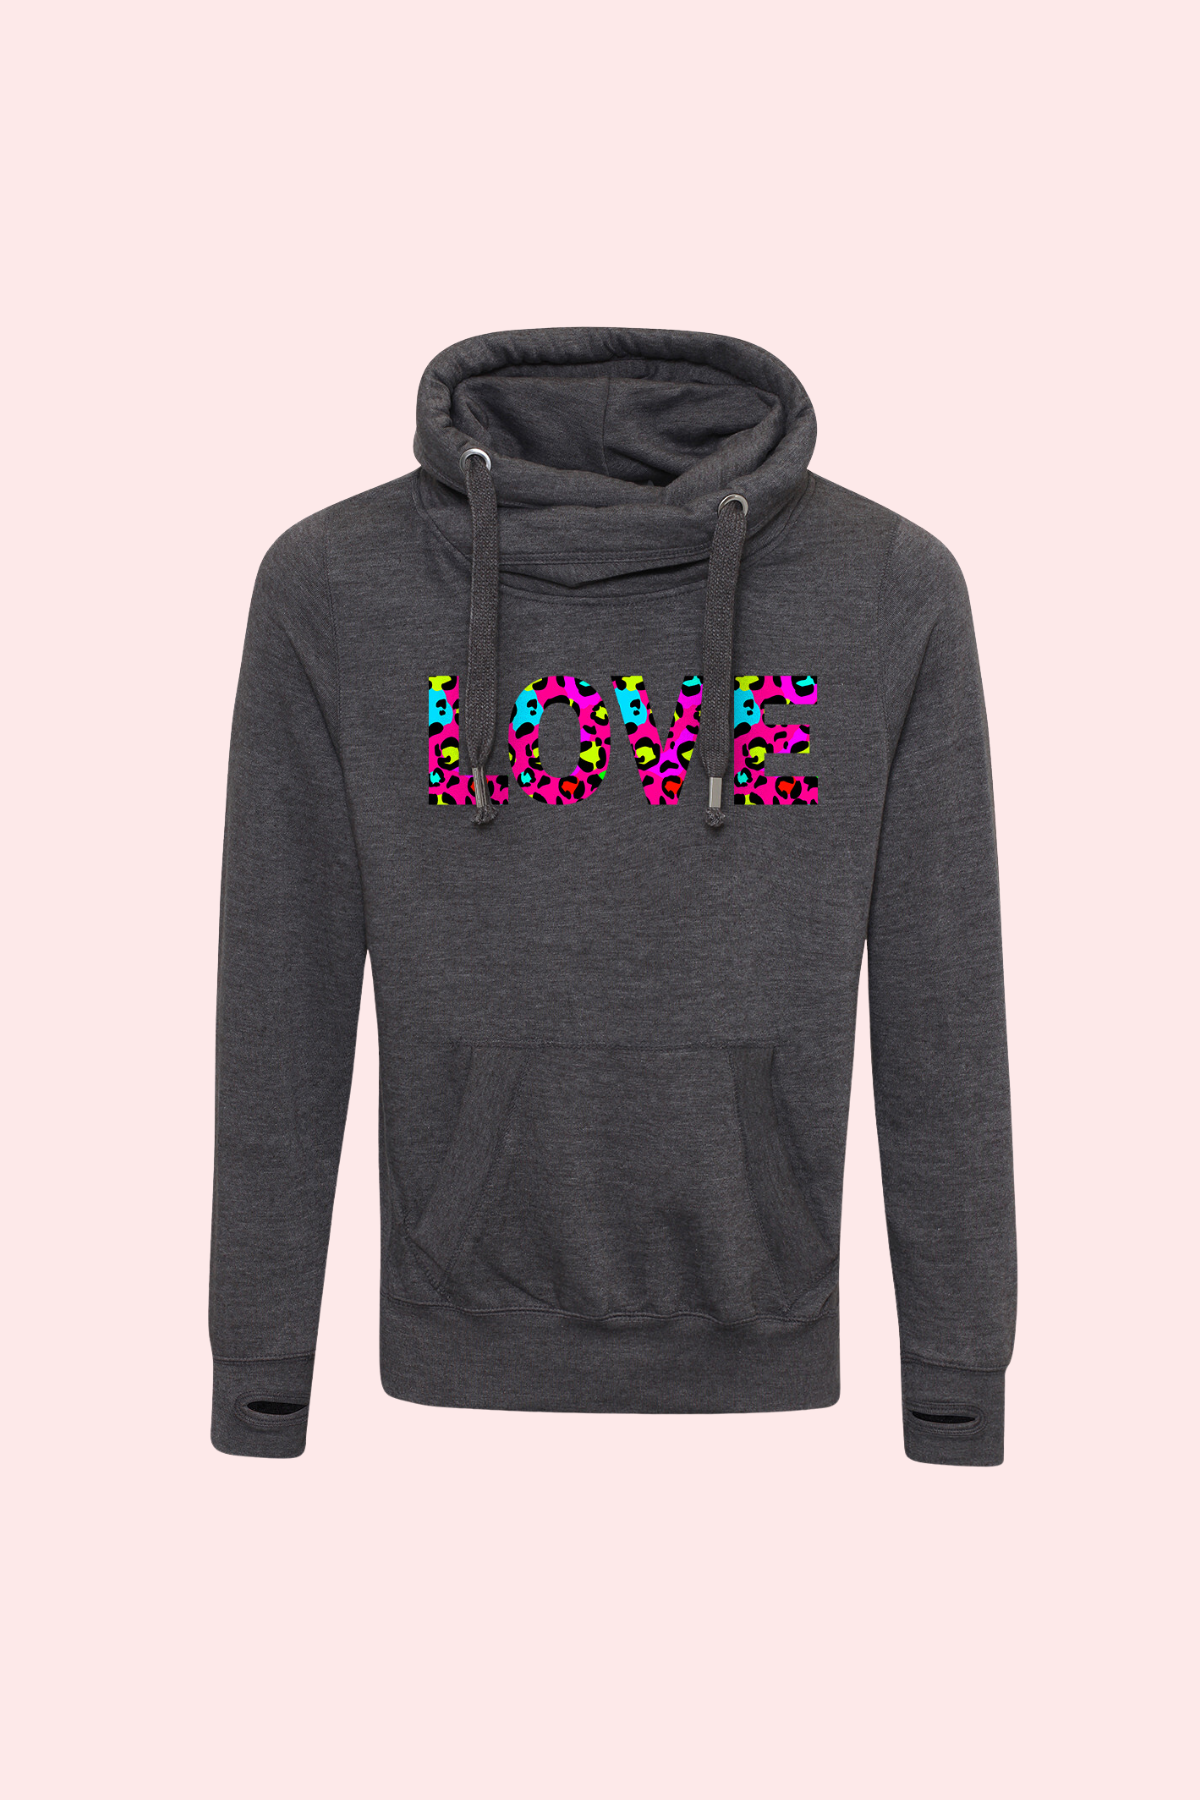 Outlet - Leopard Pink Love Cowl Neck Hoodie